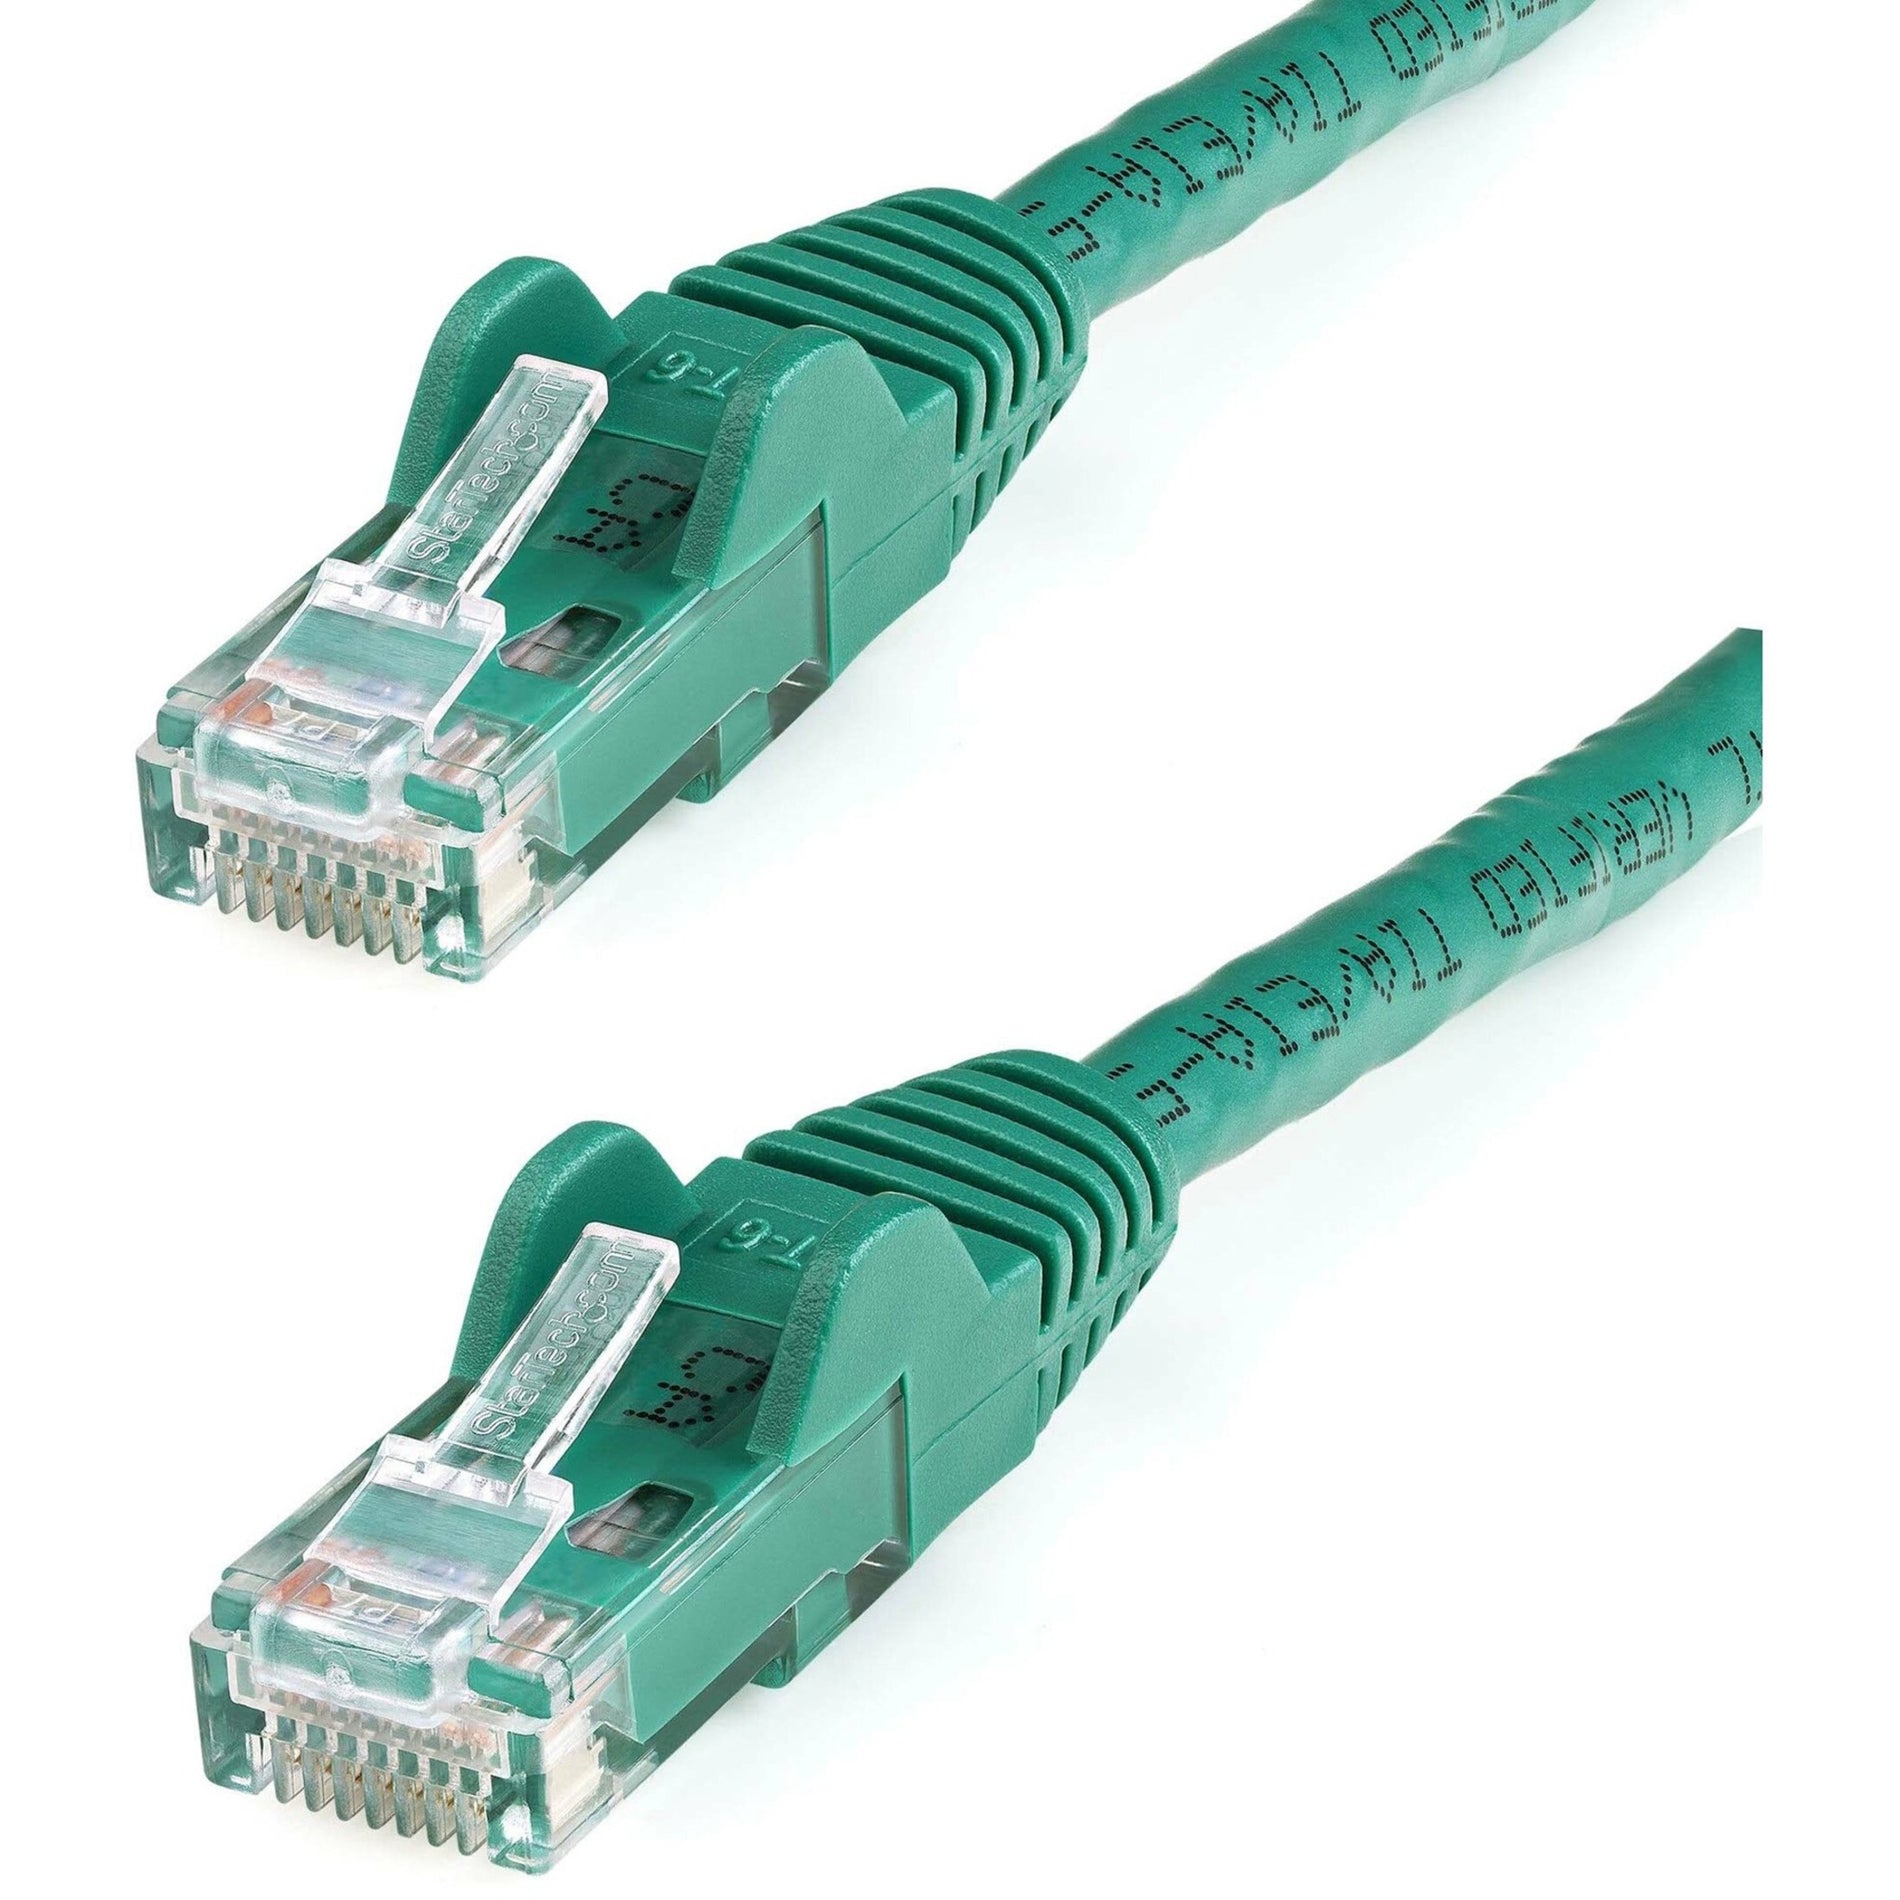 StarTech.com N6PATCH30GN Cat. 6 Network Cable, 30ft Green Ethernet Cable, Snagless RJ45 Connectors